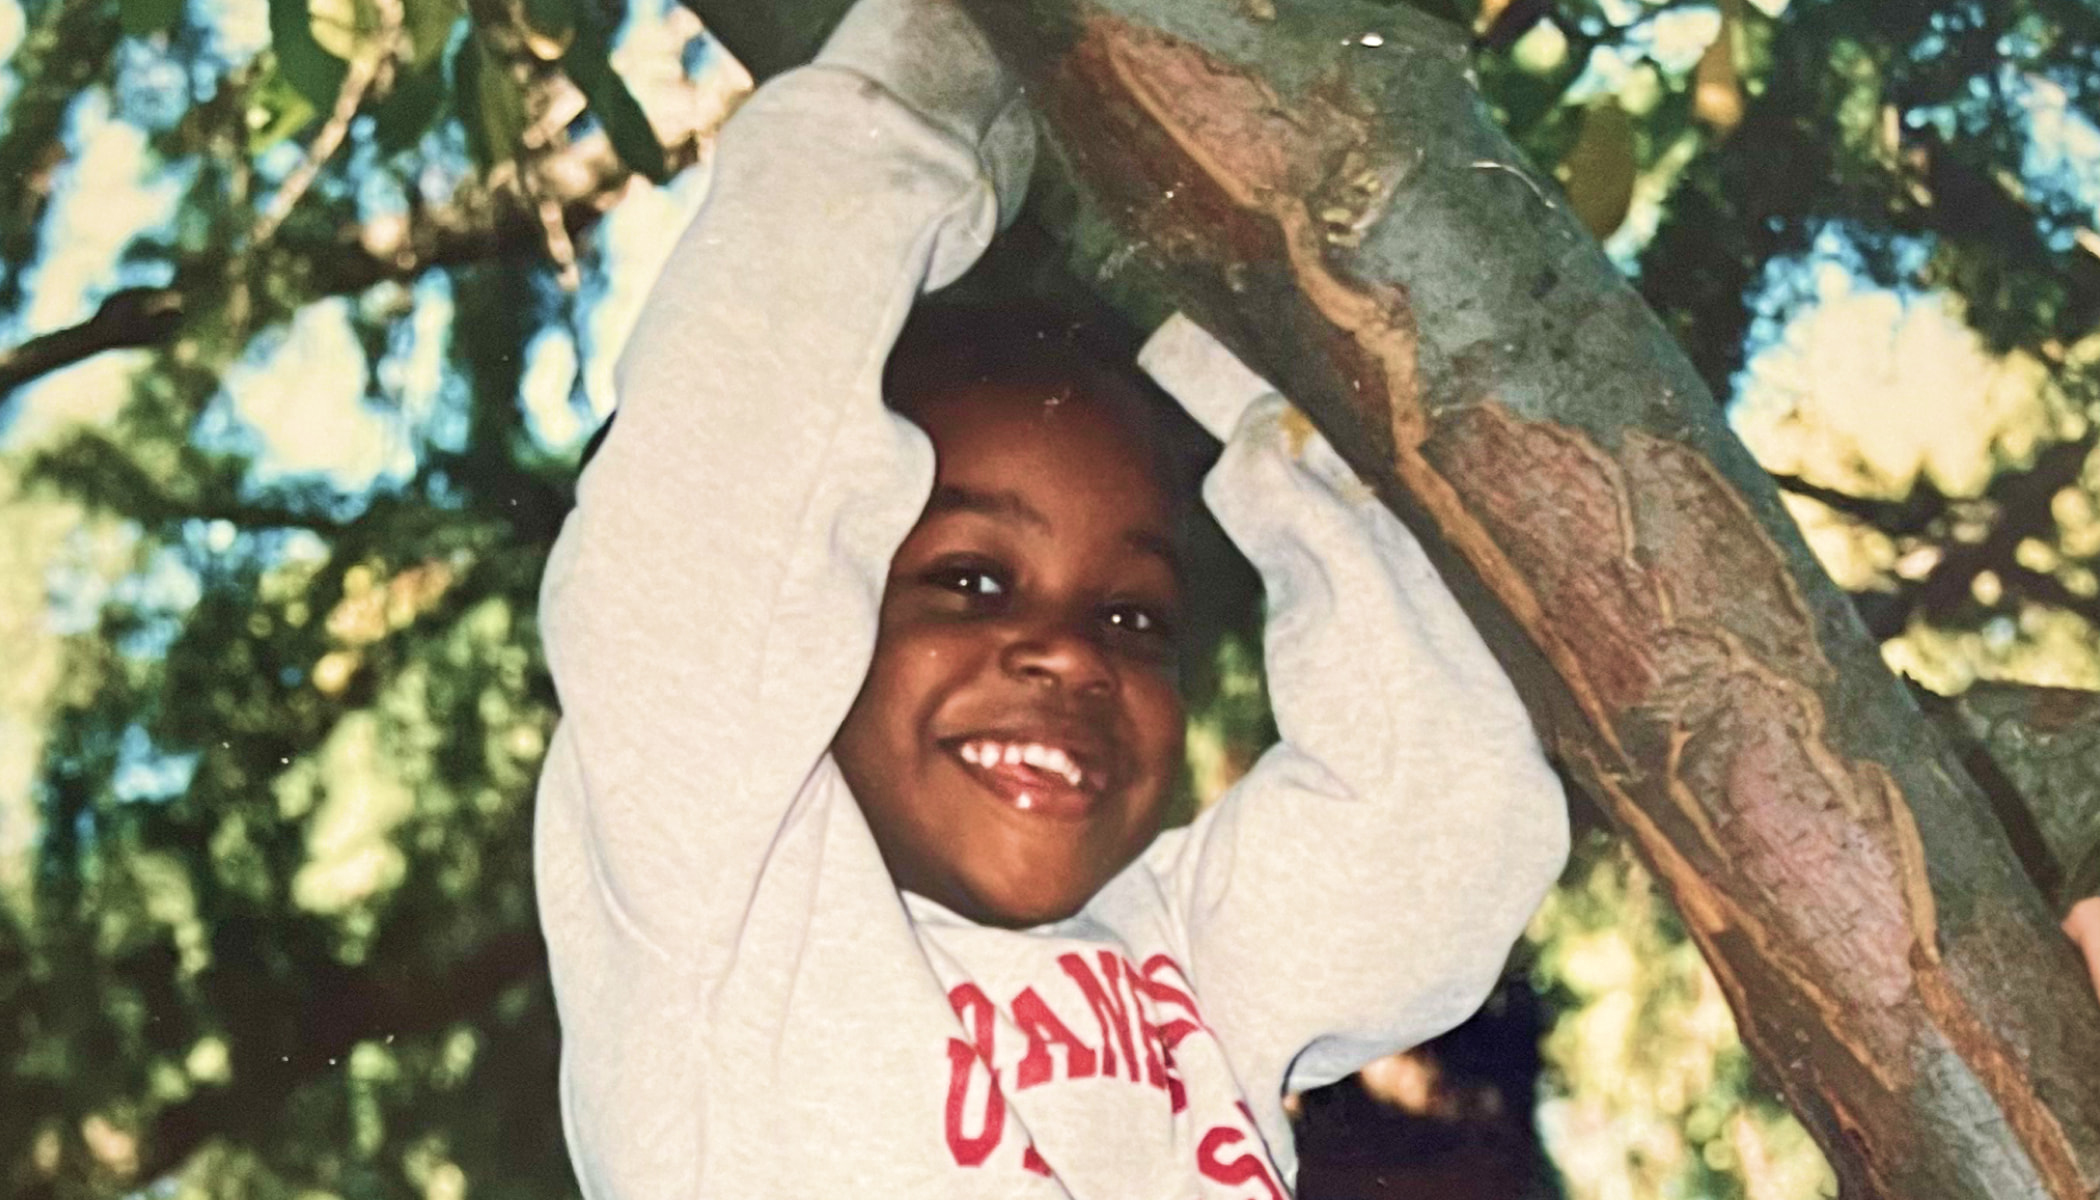 A young LaKesha Roberts holds onto a tree branch and smiles.